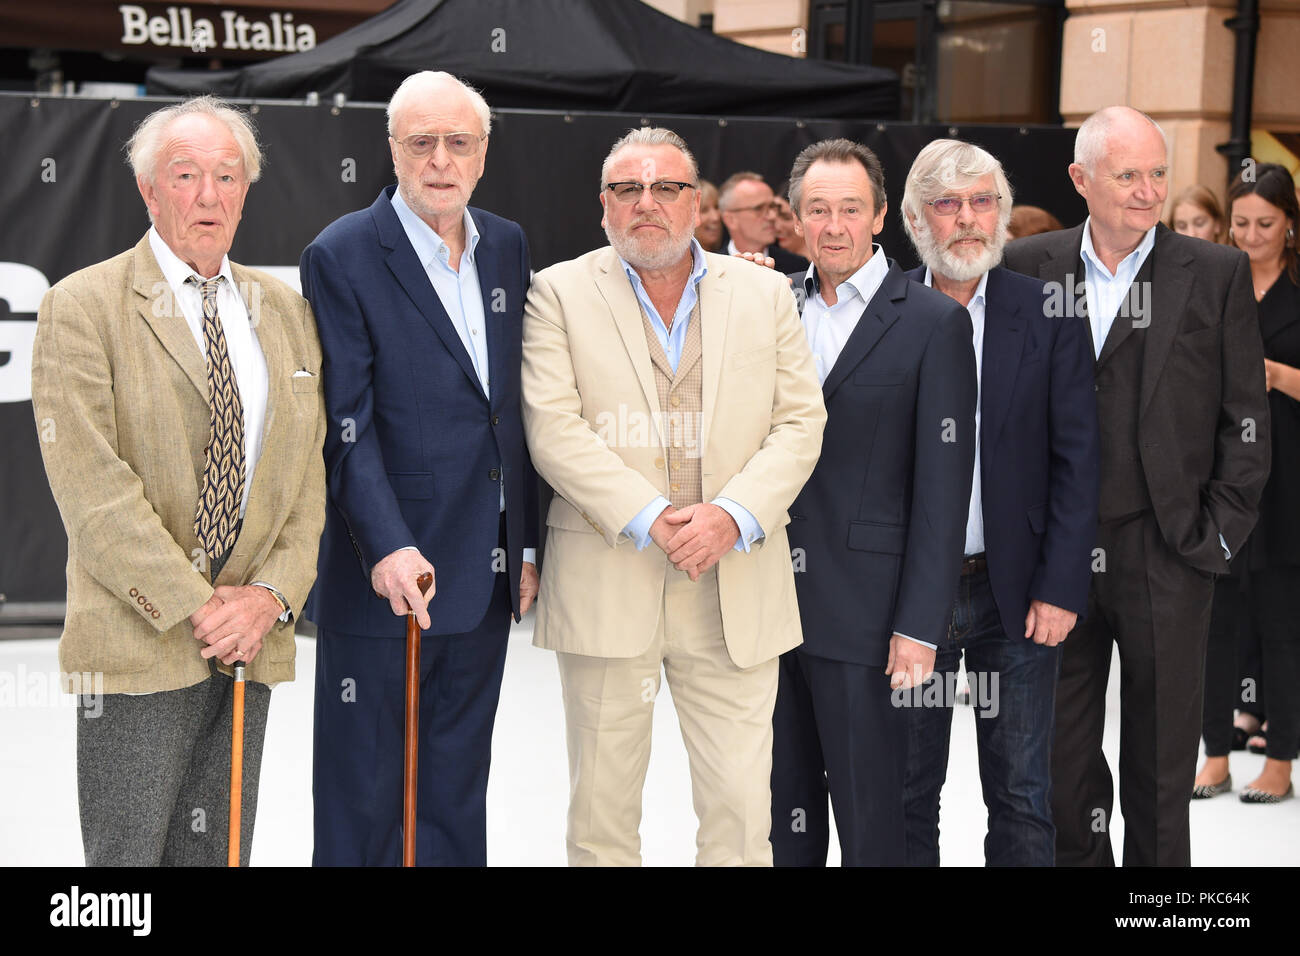 London, UK. September 12, 2018: Charlie Cox, Sir Michael Gambon, Sir Michael Caine, Ray Winstone, Paul Whitehouse, Sir Tom Courtenay & Jim Broadbent at the World Premiere of 'King of Thieves' at the Vue Cinema, Leicester Square, London. Picture: Steve Vas/Featureflash Credit: Sarah Stewart/Alamy Live News Stock Photo